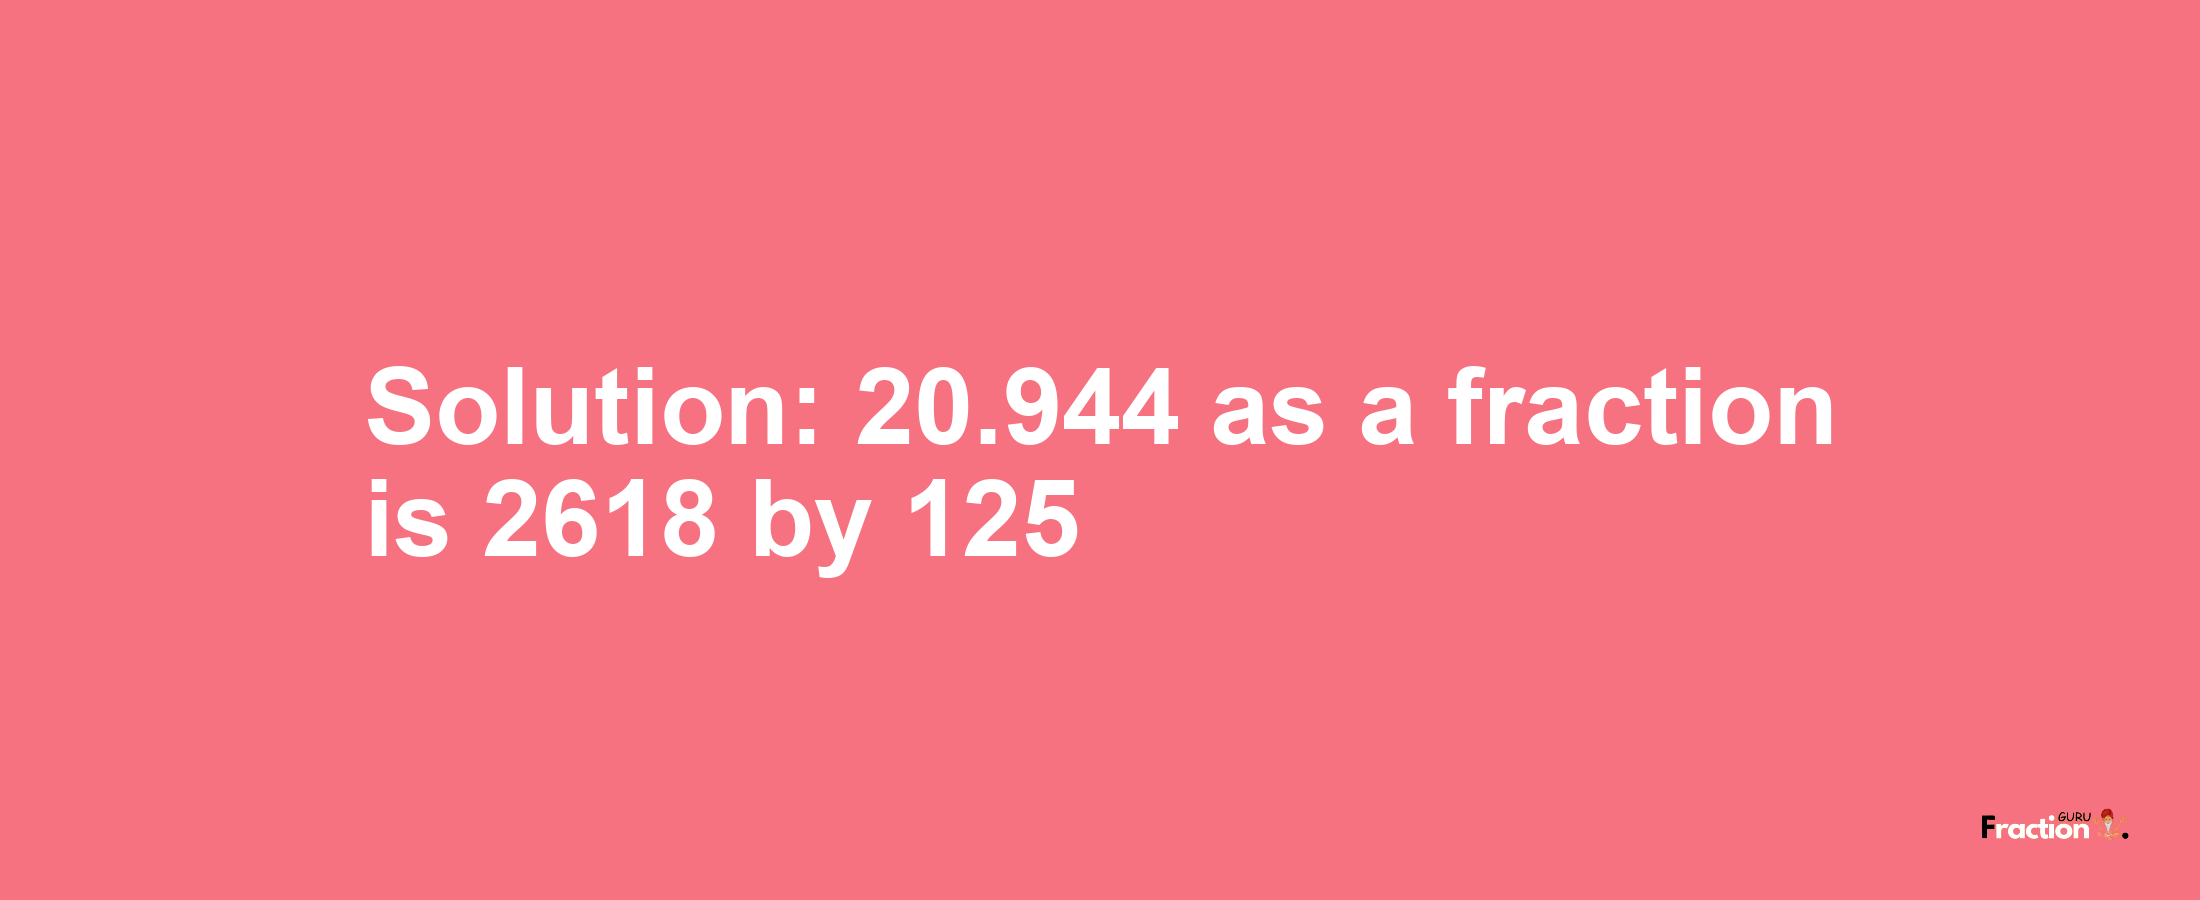 Solution:20.944 as a fraction is 2618/125